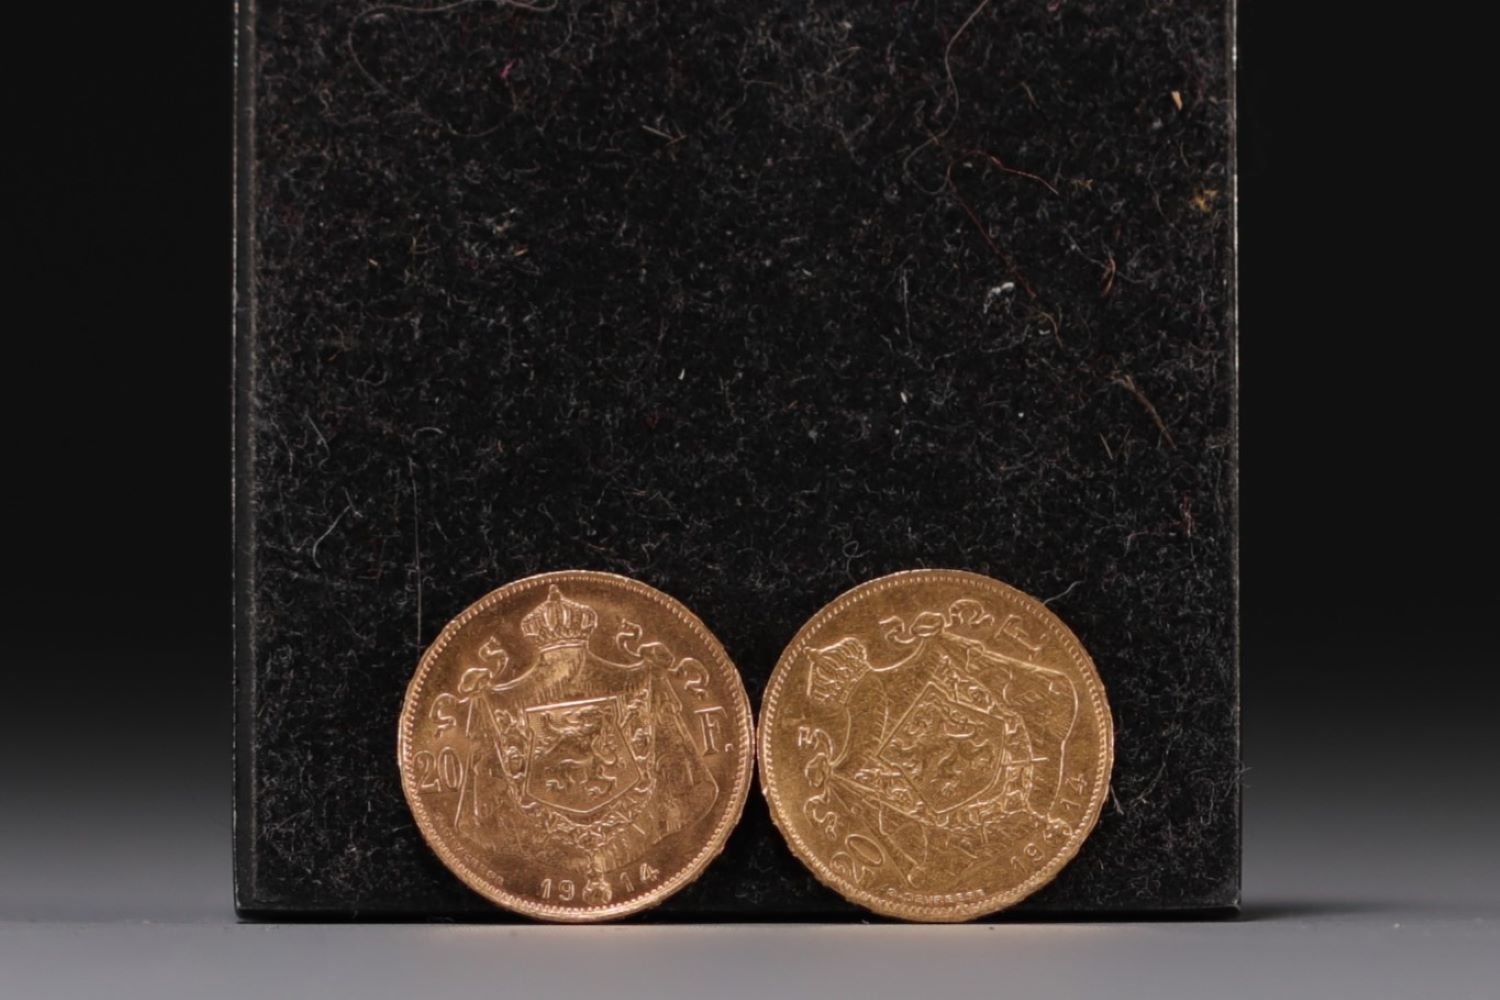 Set of two 20 franc Albert 1er gold coins of 1914. - Image 2 of 2